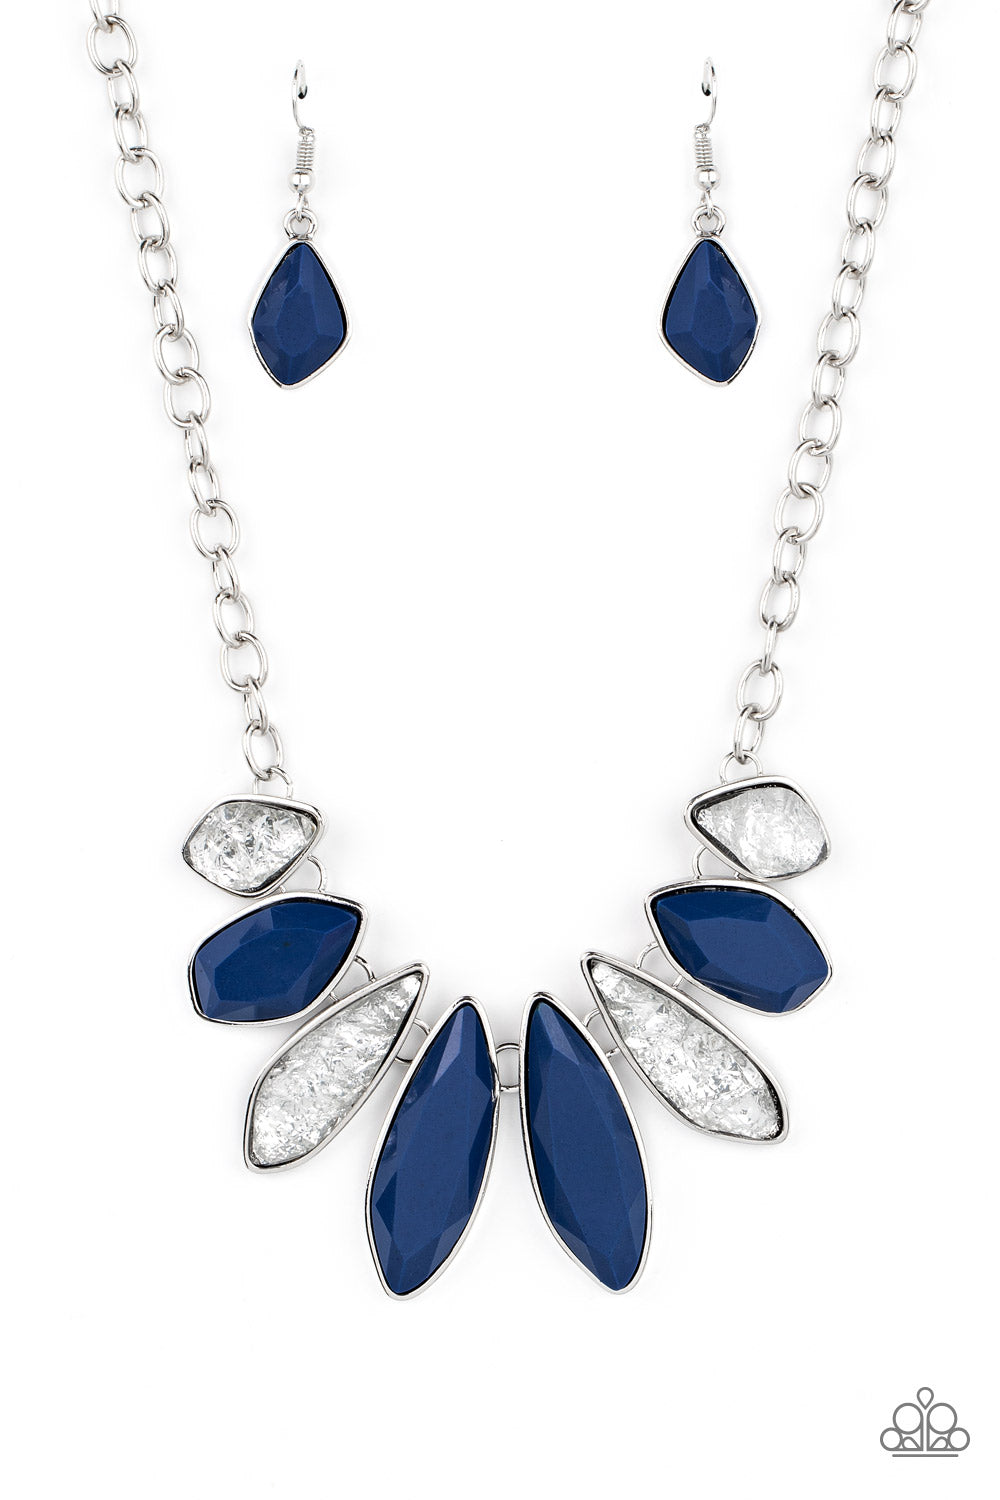 Paparazzi Necklaces - Crystallized Couture - Blue